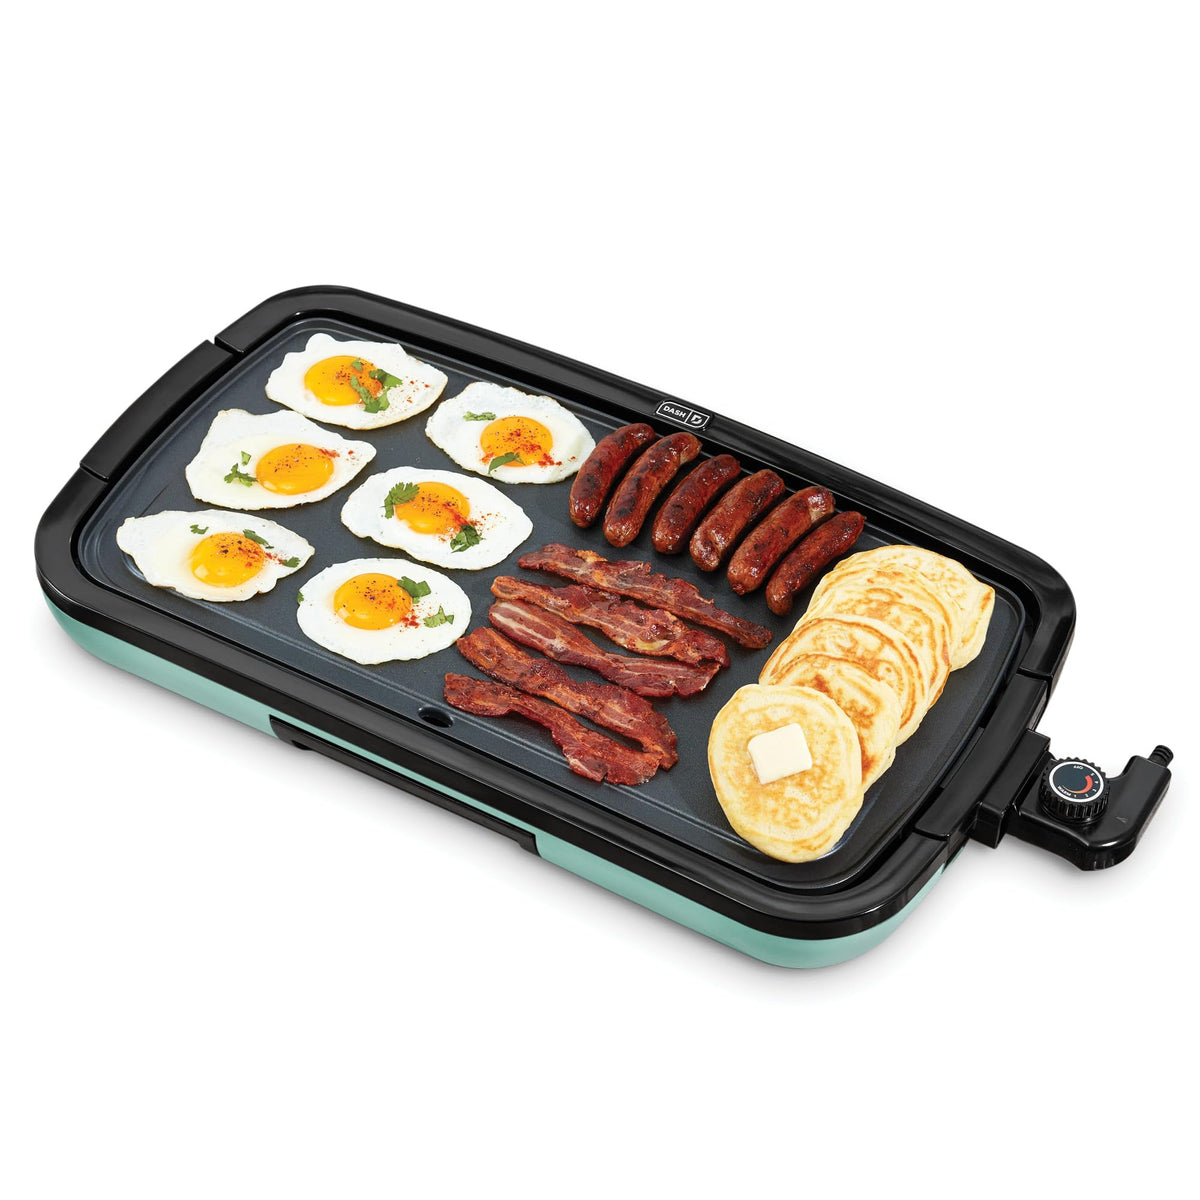 Dash Non-Stick Electric Pan (Aqua) with Temp Control | No. 1 in the US | Can be used as Dosa Tawa, Grill Pan, Uttapam/Pancake Pan|Inc Drip Tray & Recipe Book | with 1 Yr Warranty | 20x10.5"